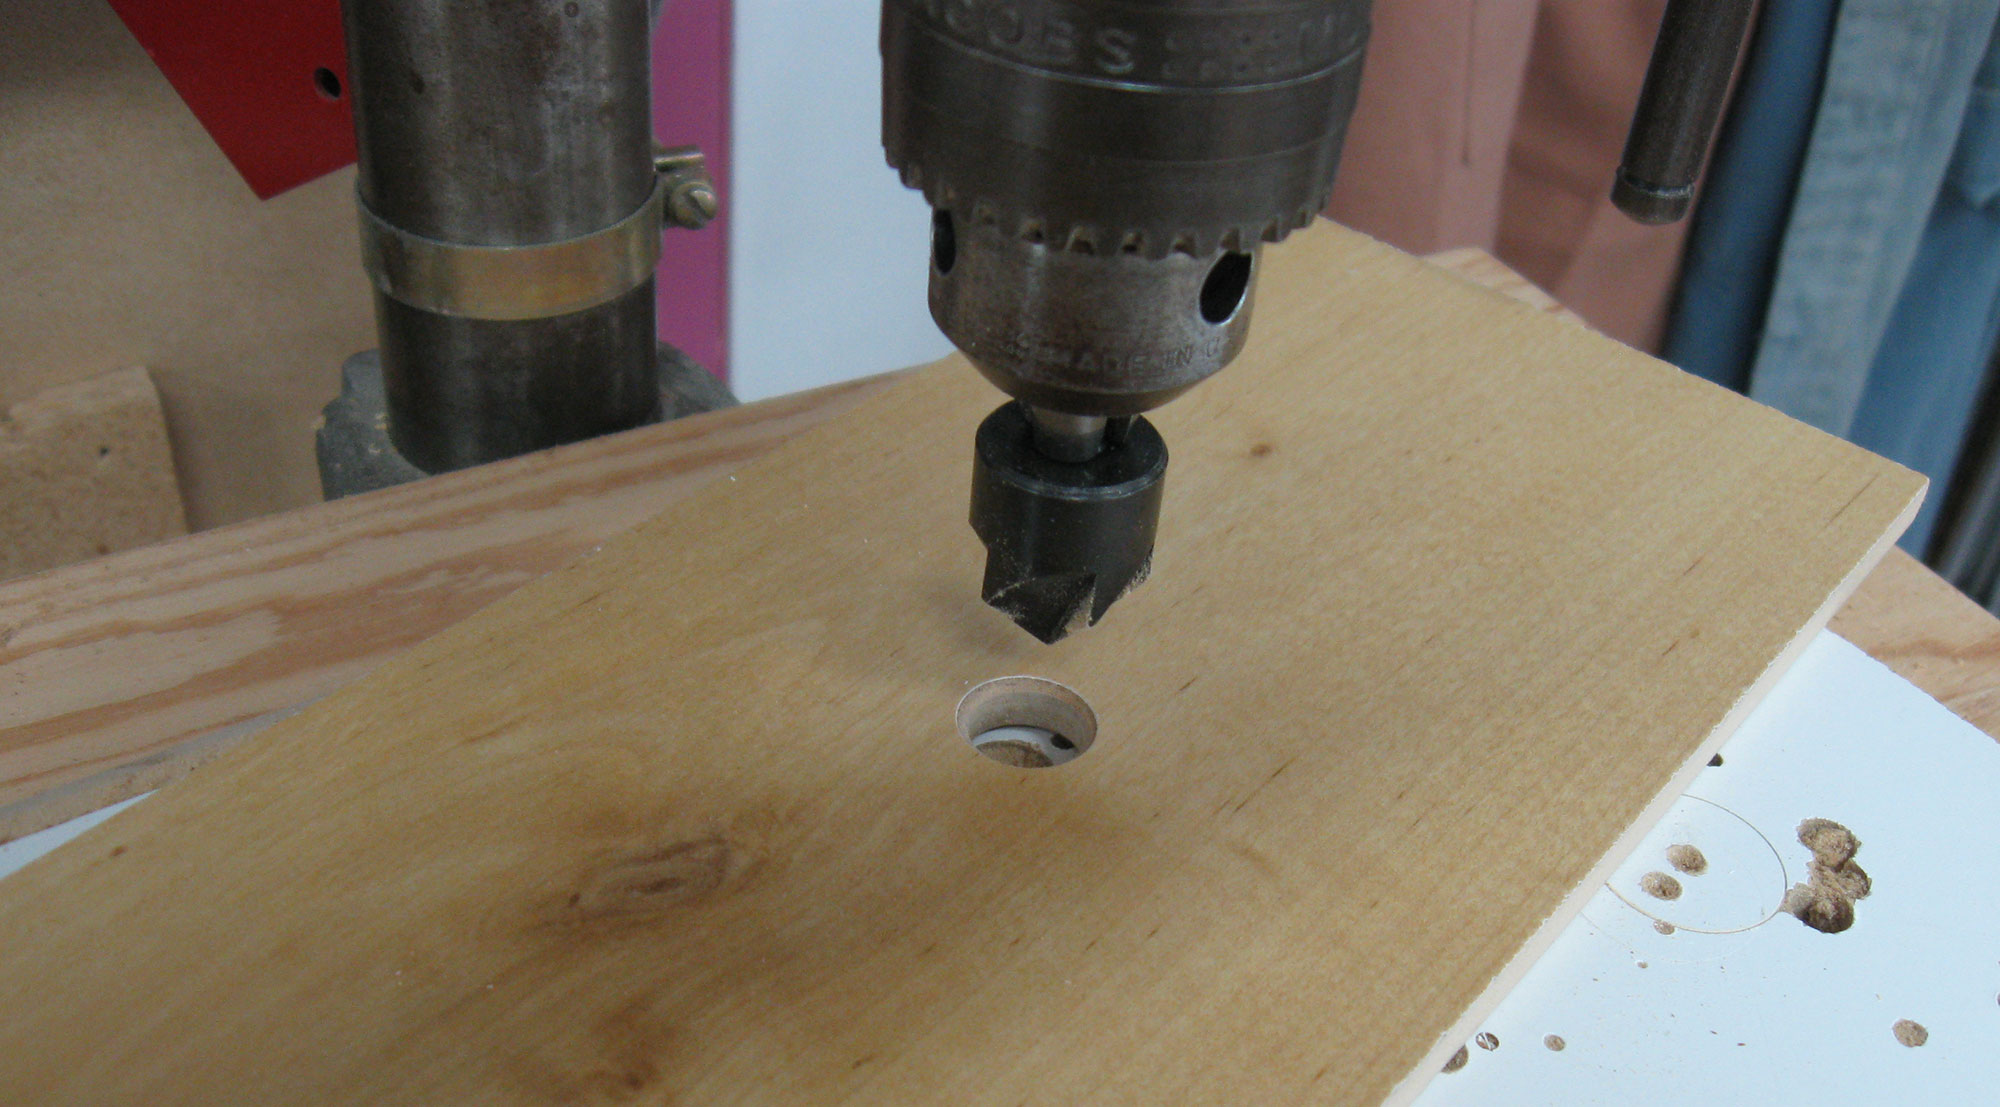 Drilling a centered hole.